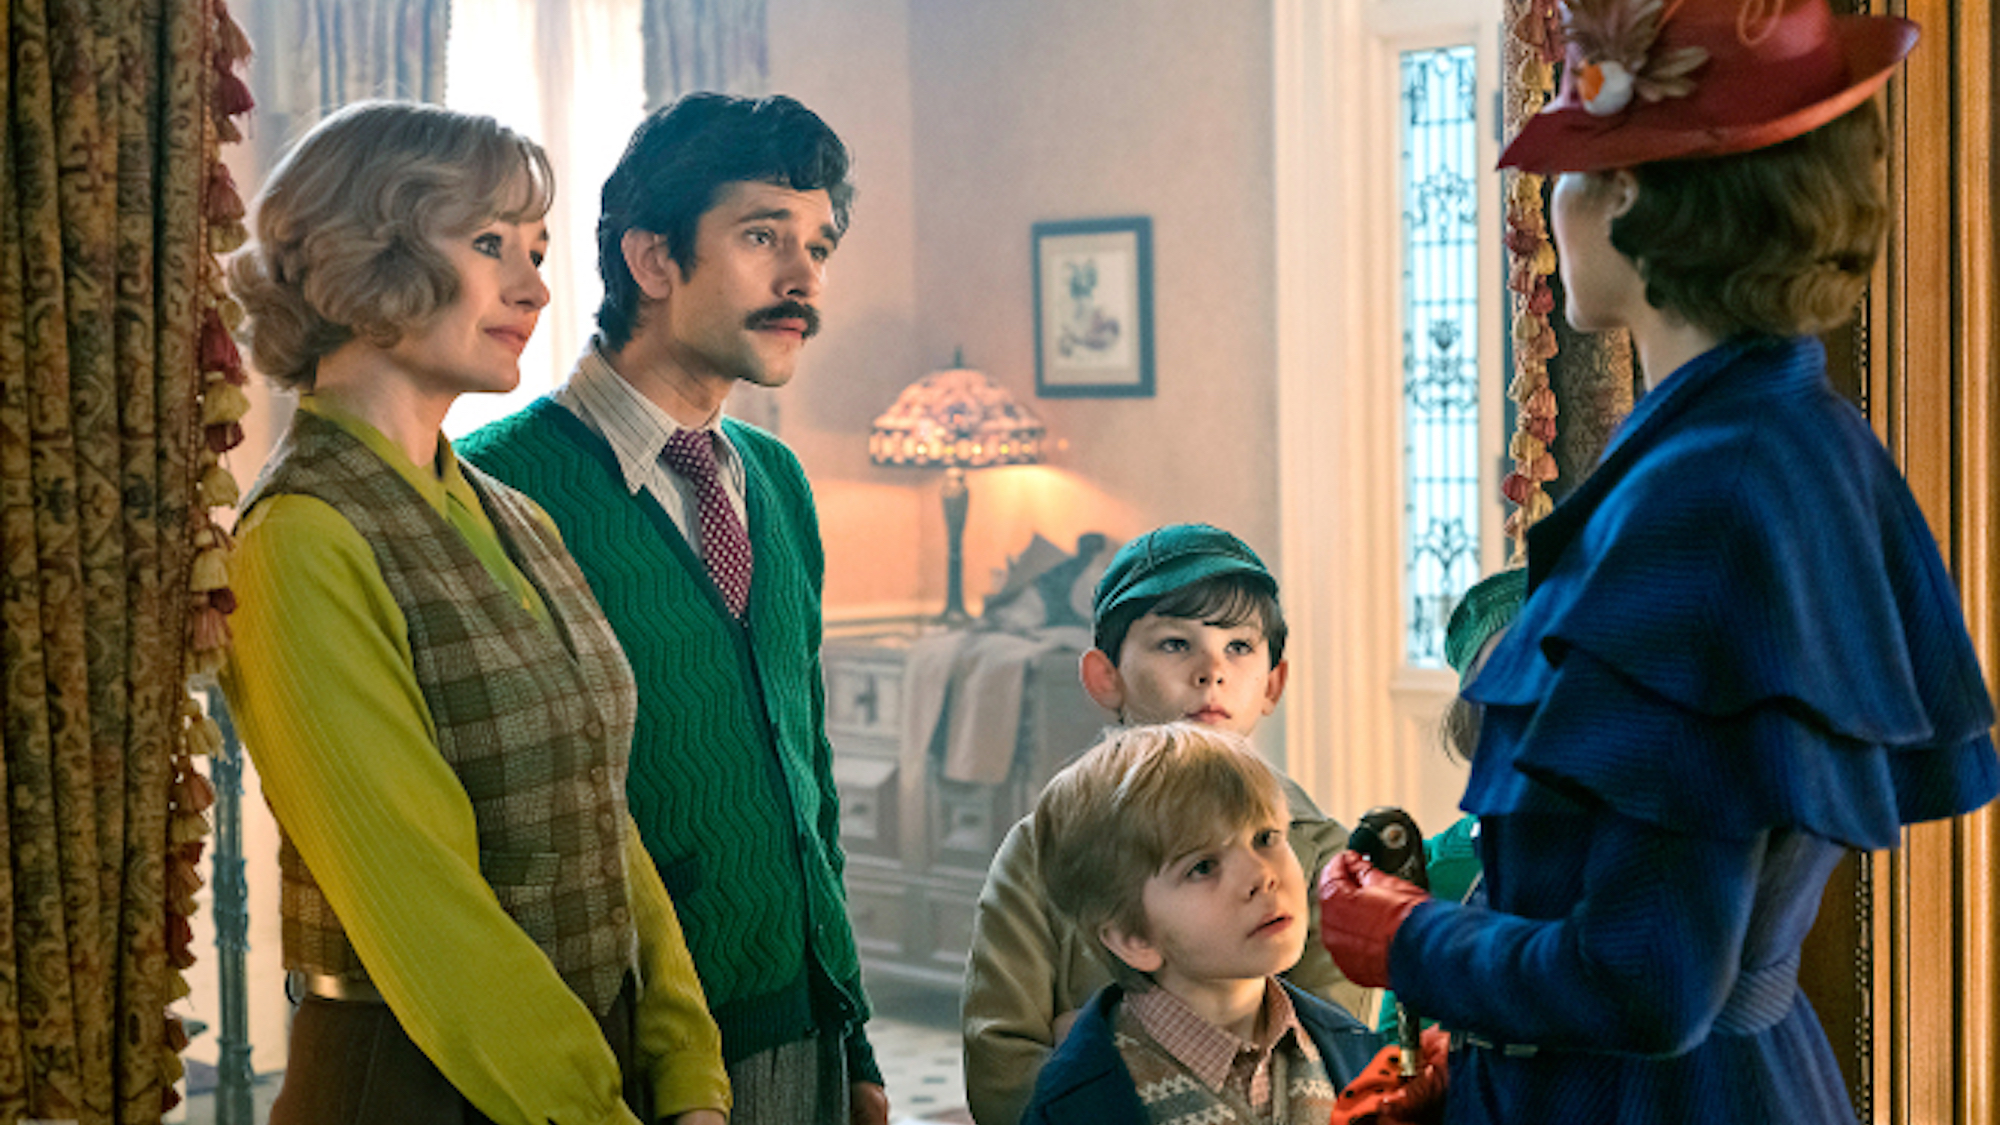 ART OF THE CUT, with Wyatt Smith, ACE on Mary Poppins Returns 20